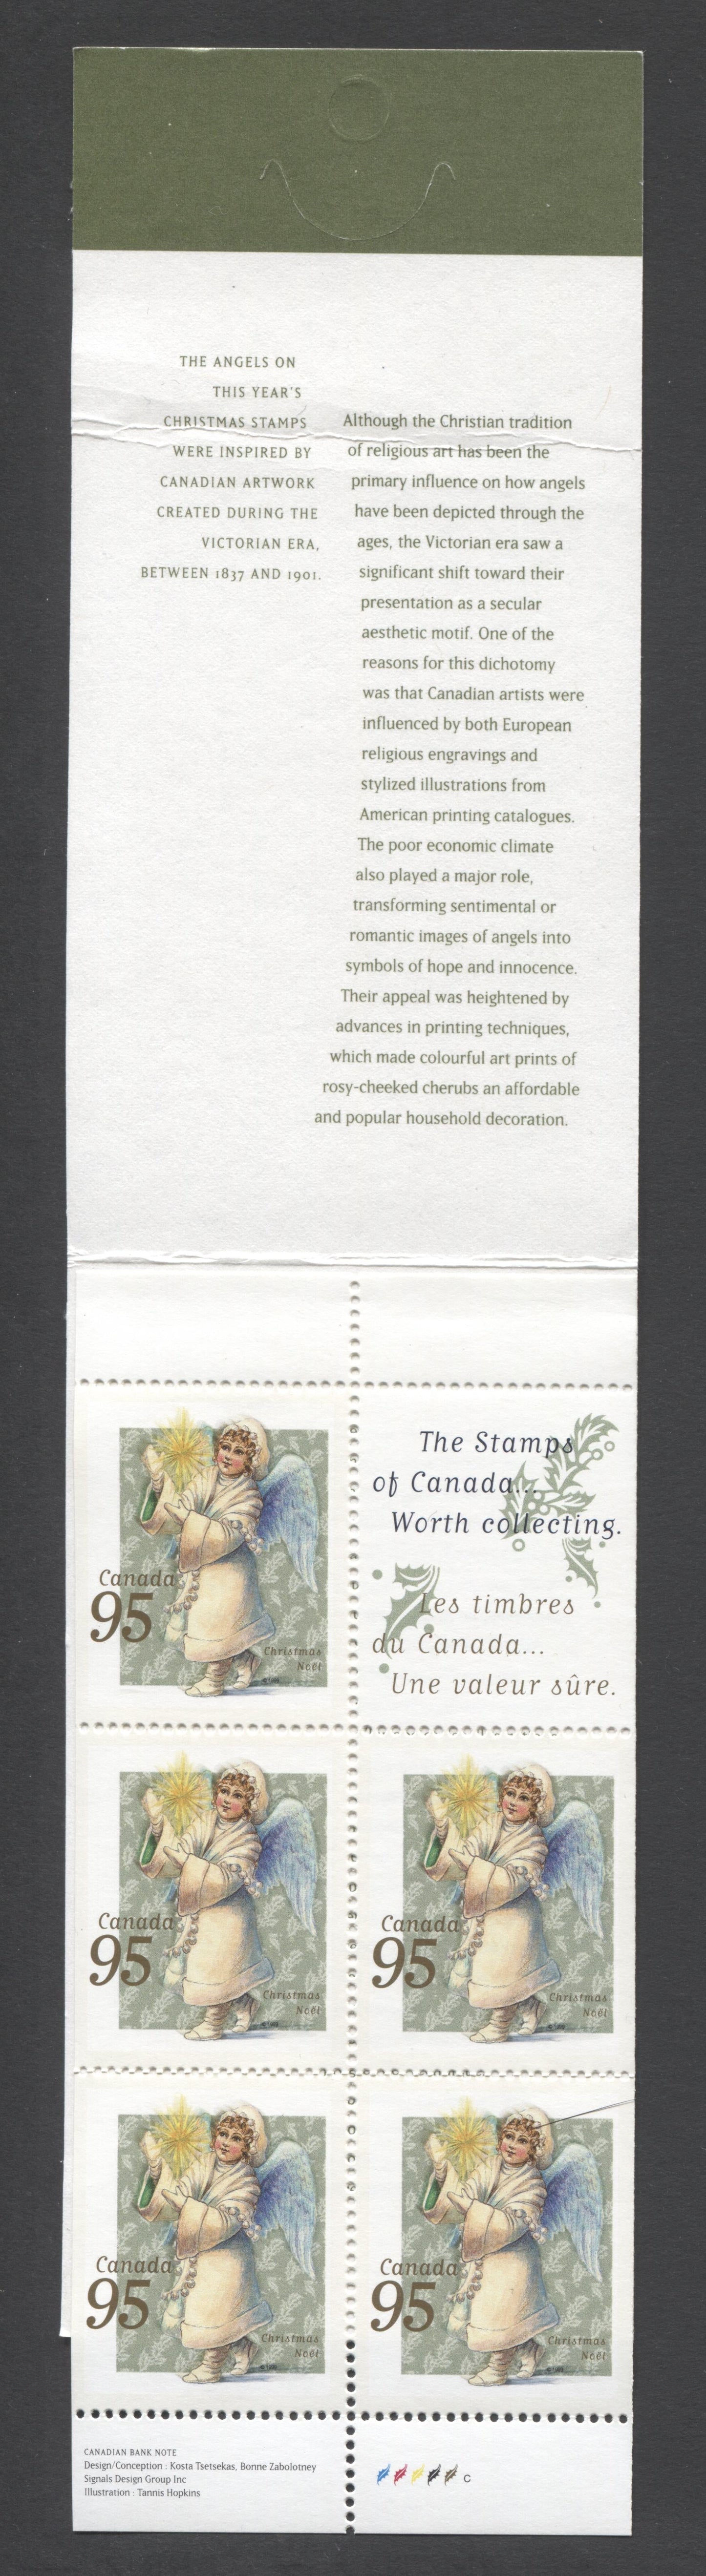 Canada #BK224a-b 1999 Christmas Issue, Complete $4.75 Booklet, Tullis Russell Coatings Paper, Dead Paper, 4 mm GT-4 Tagging